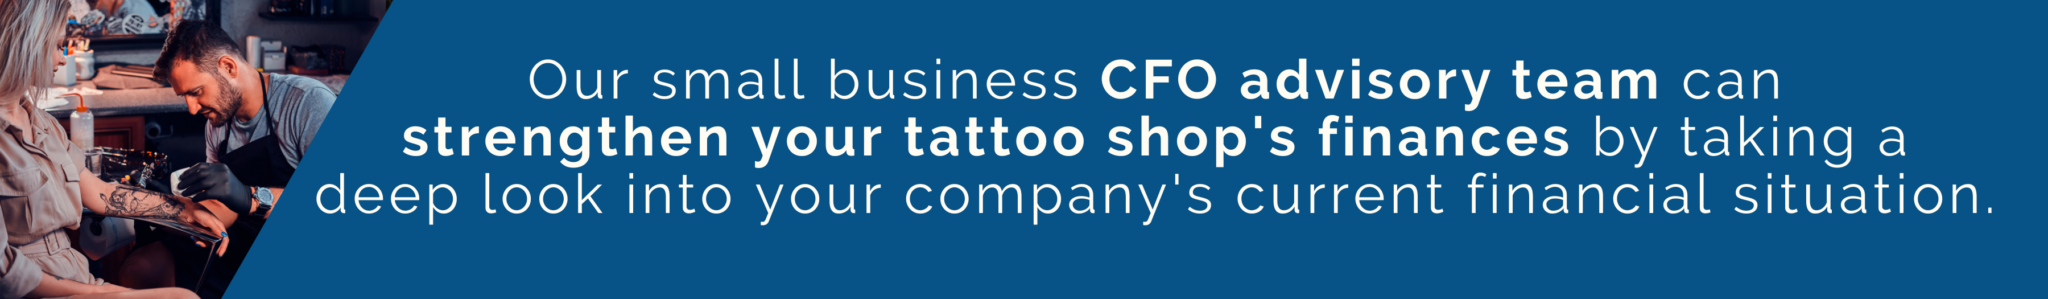 Our small business CFO advisory team can strengthen your tattoo shop's finances by taking a deep look into your company's current financial situation.